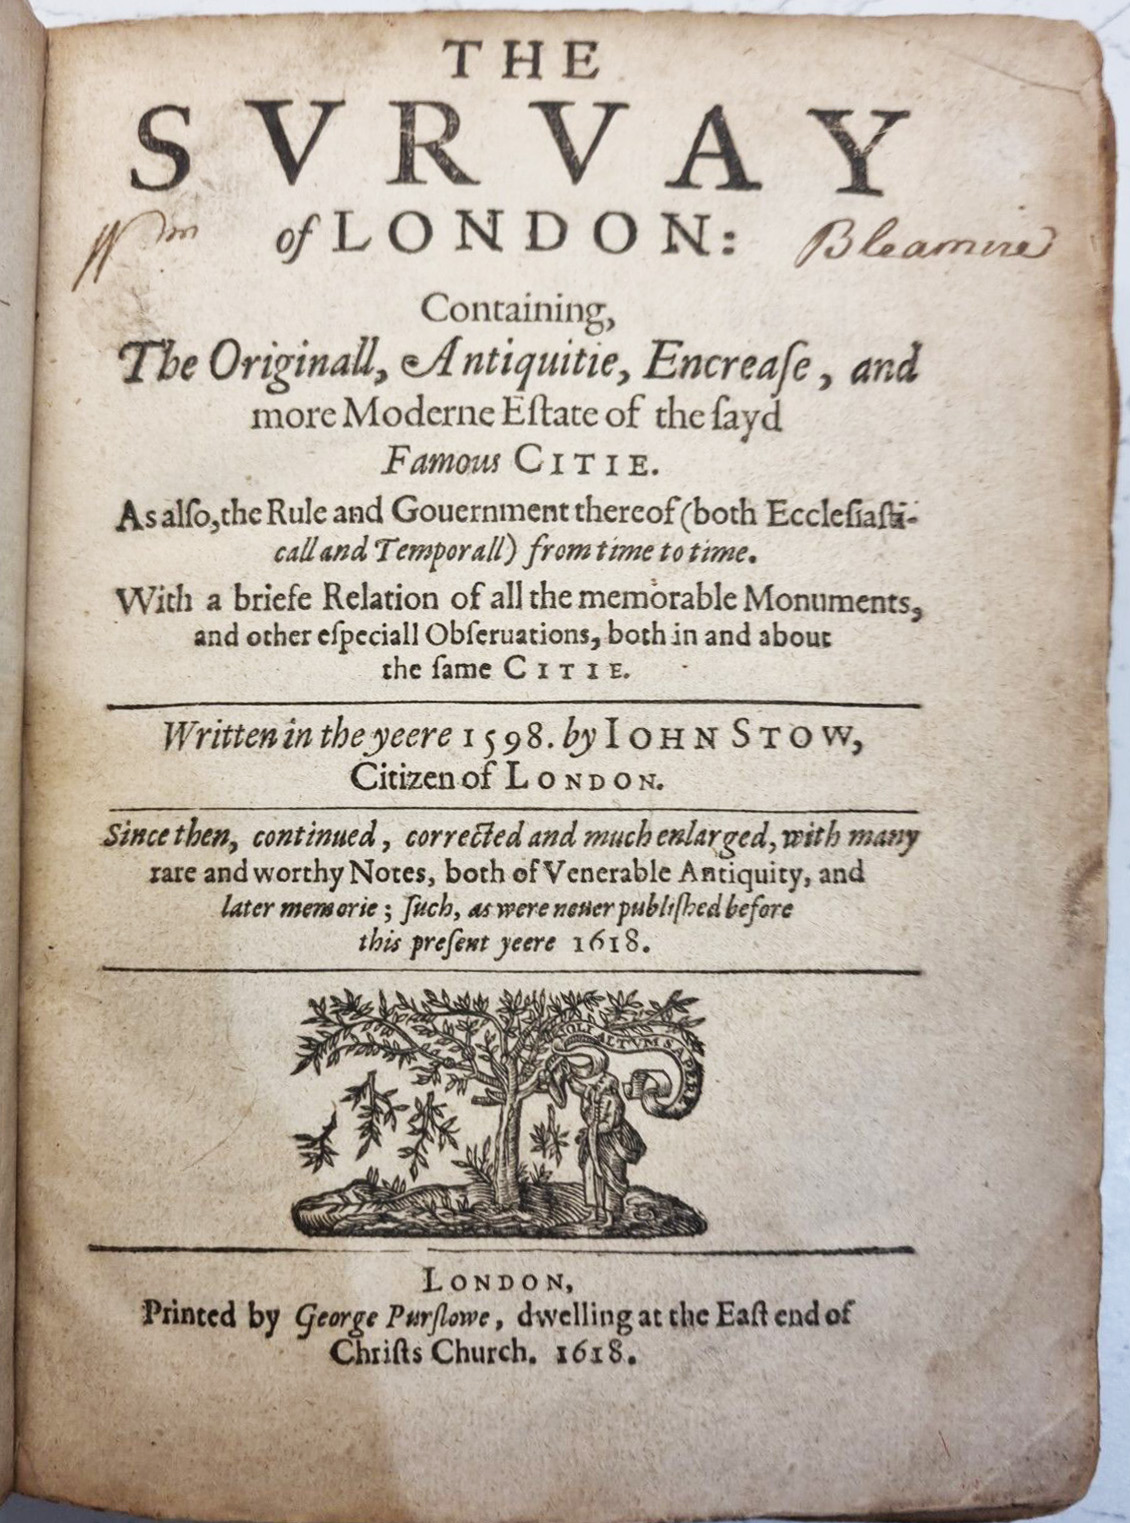 John Stow's The Survey of London (1618 edition)